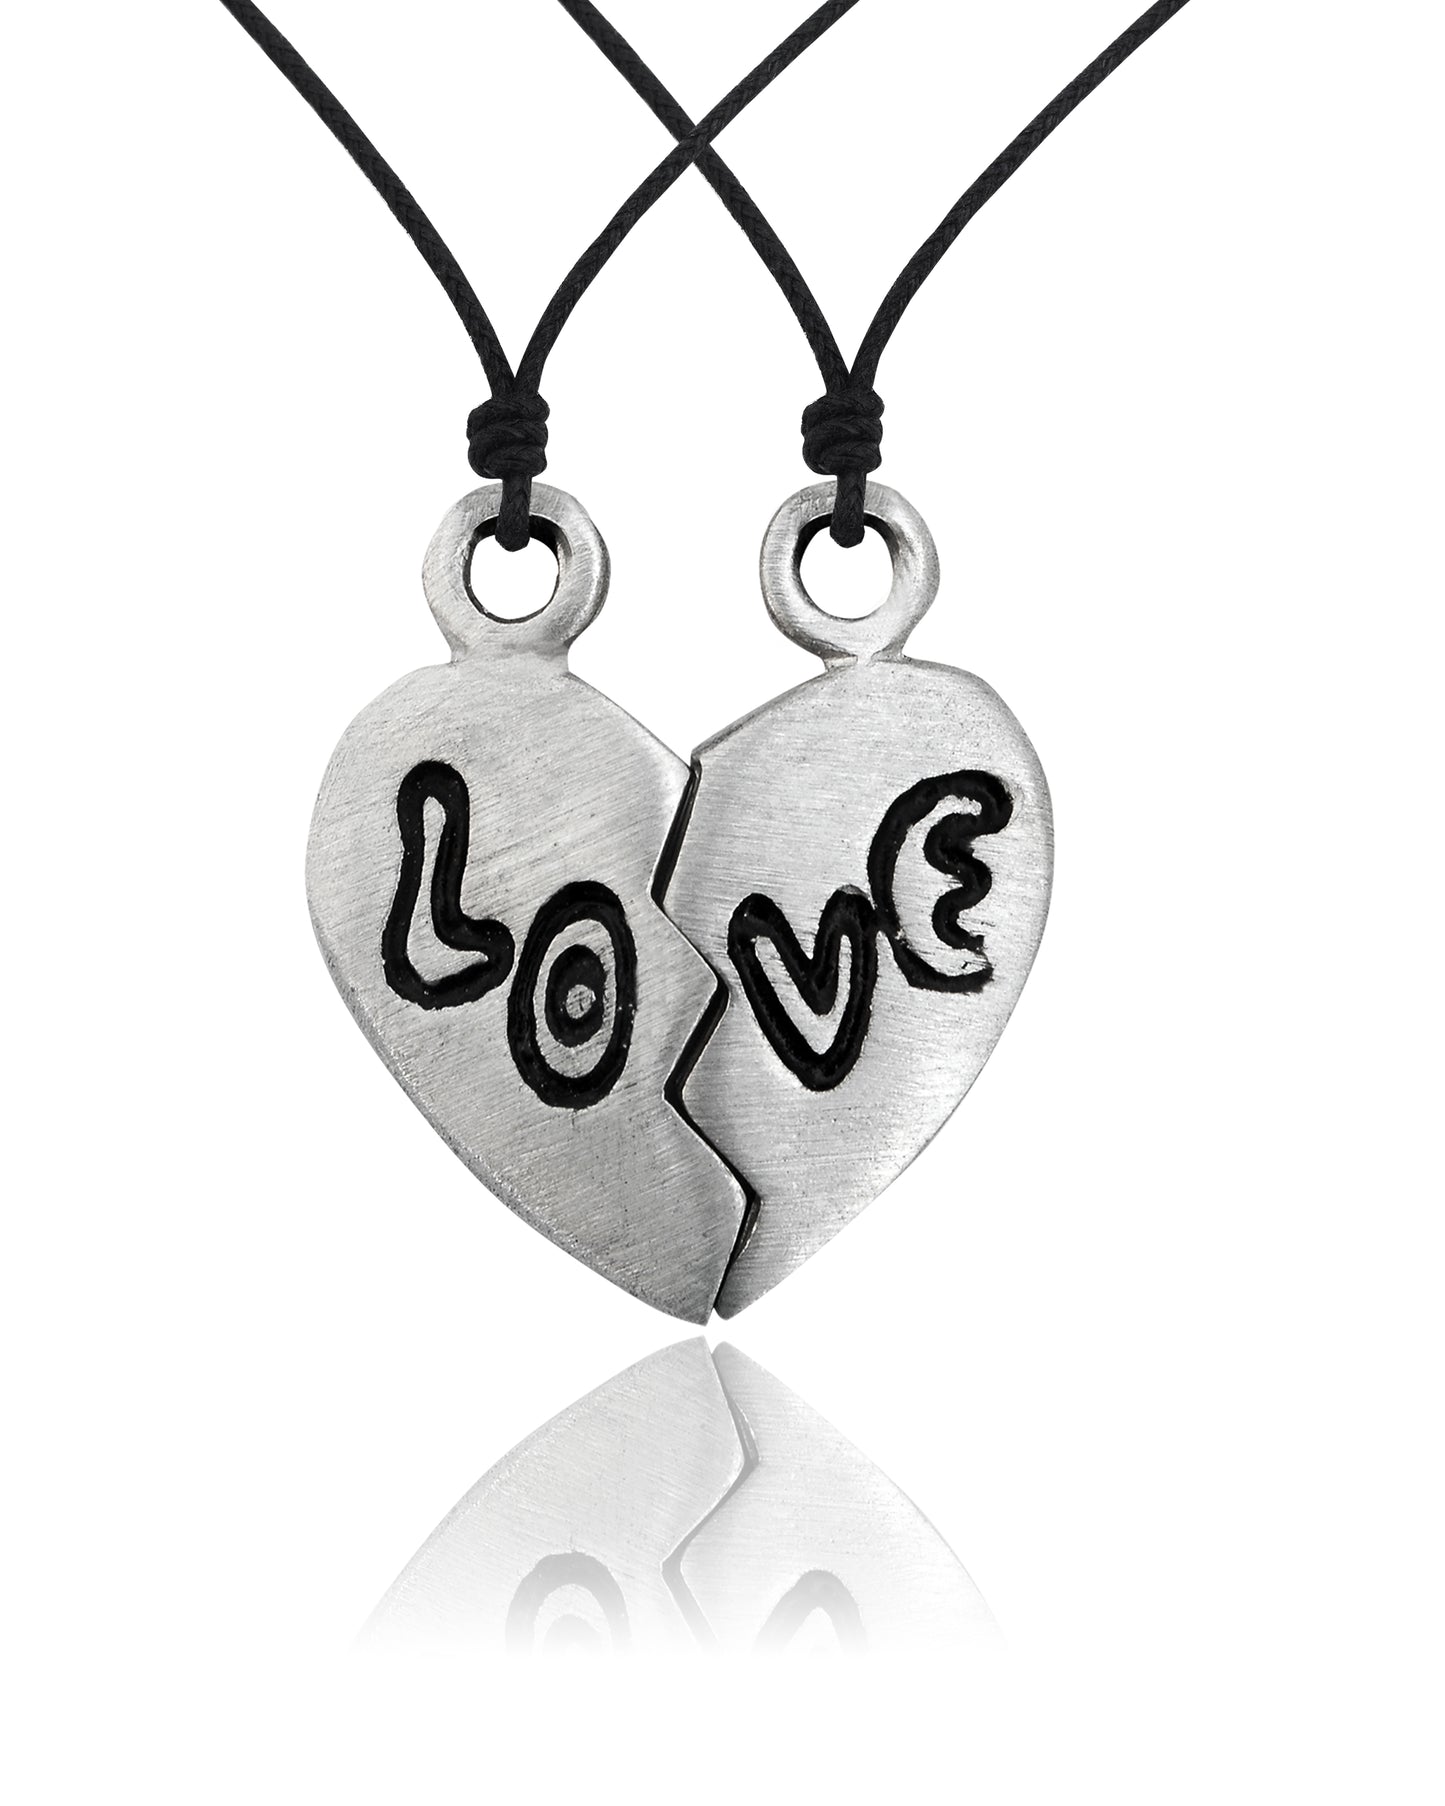 Bestfriend Couple Pendant Silver Pewter Gold Brass Charm Necklace Pendant Jewelr